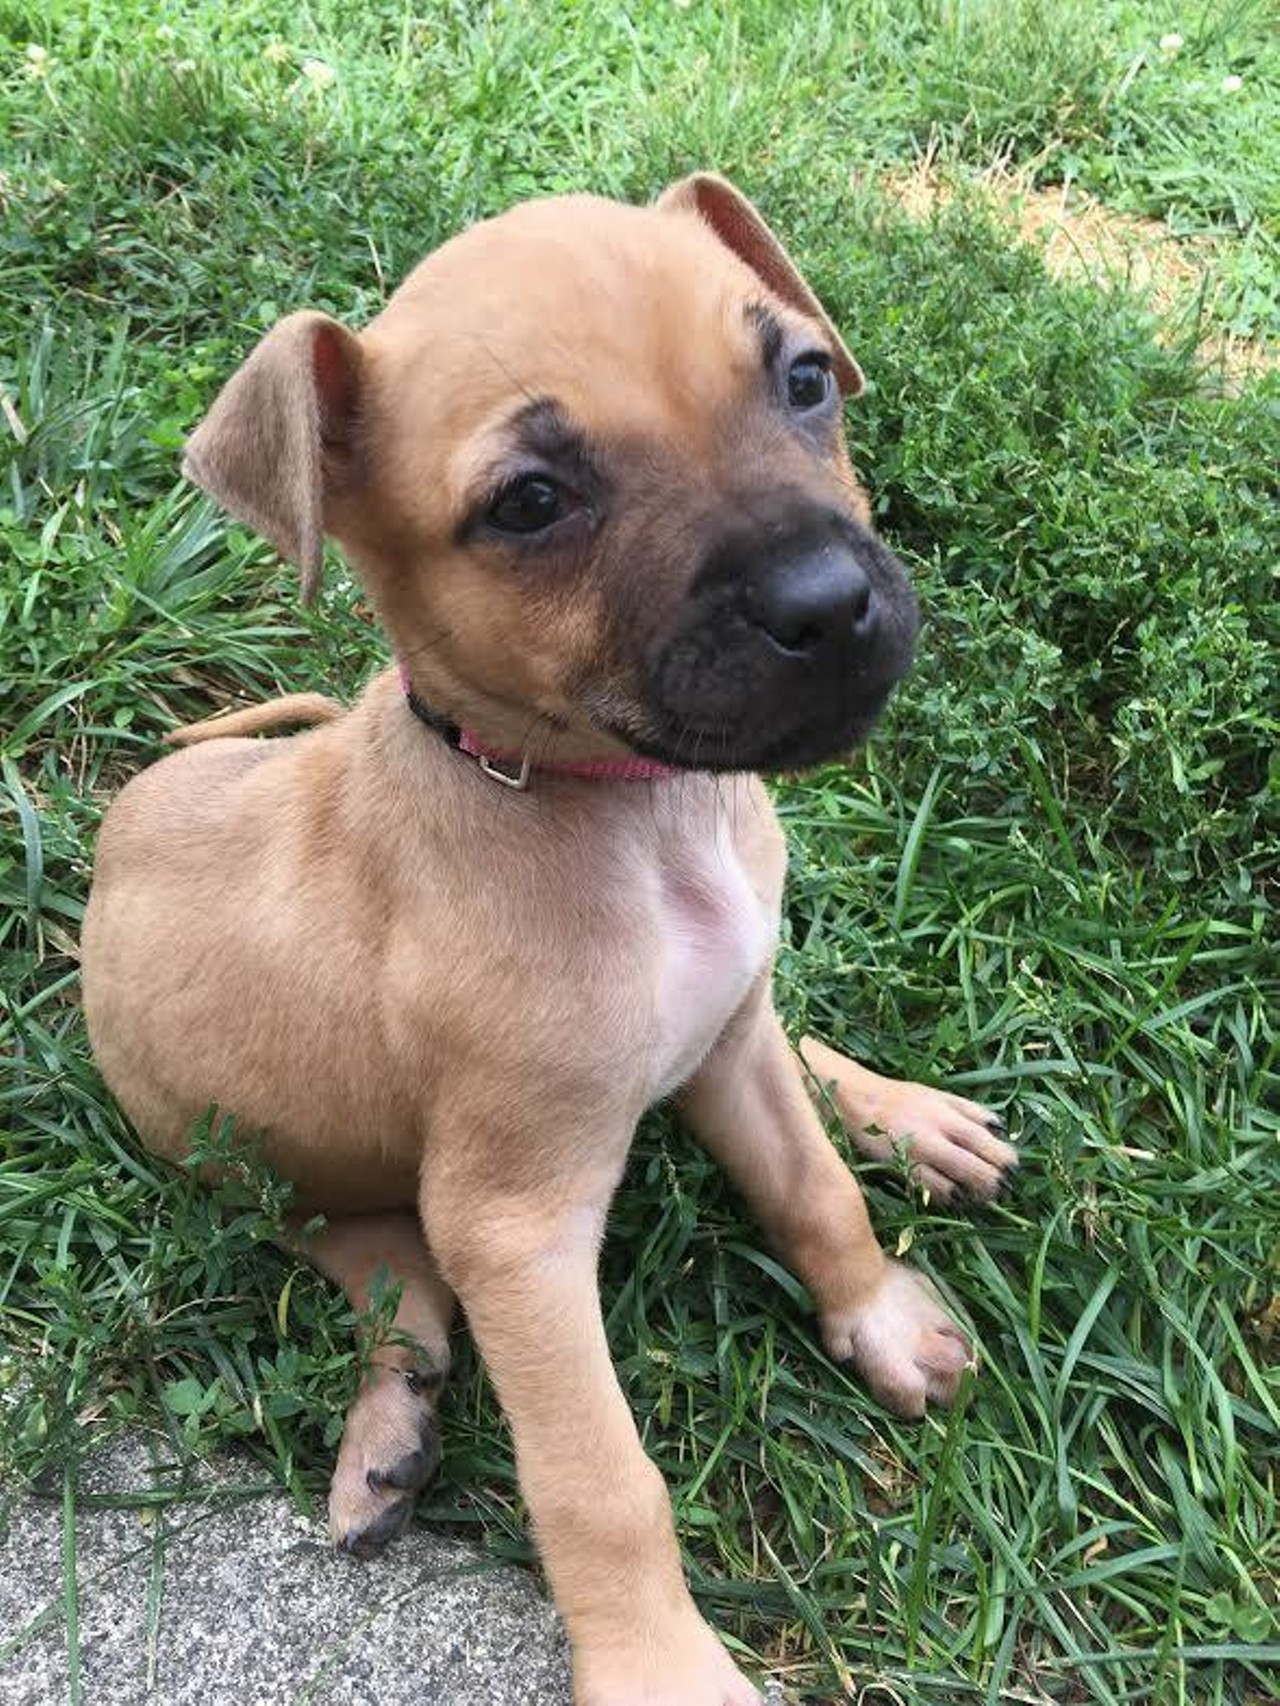  Nutmeg 
Terrier Mix | Female | Puppy 
Such a lil nugget.